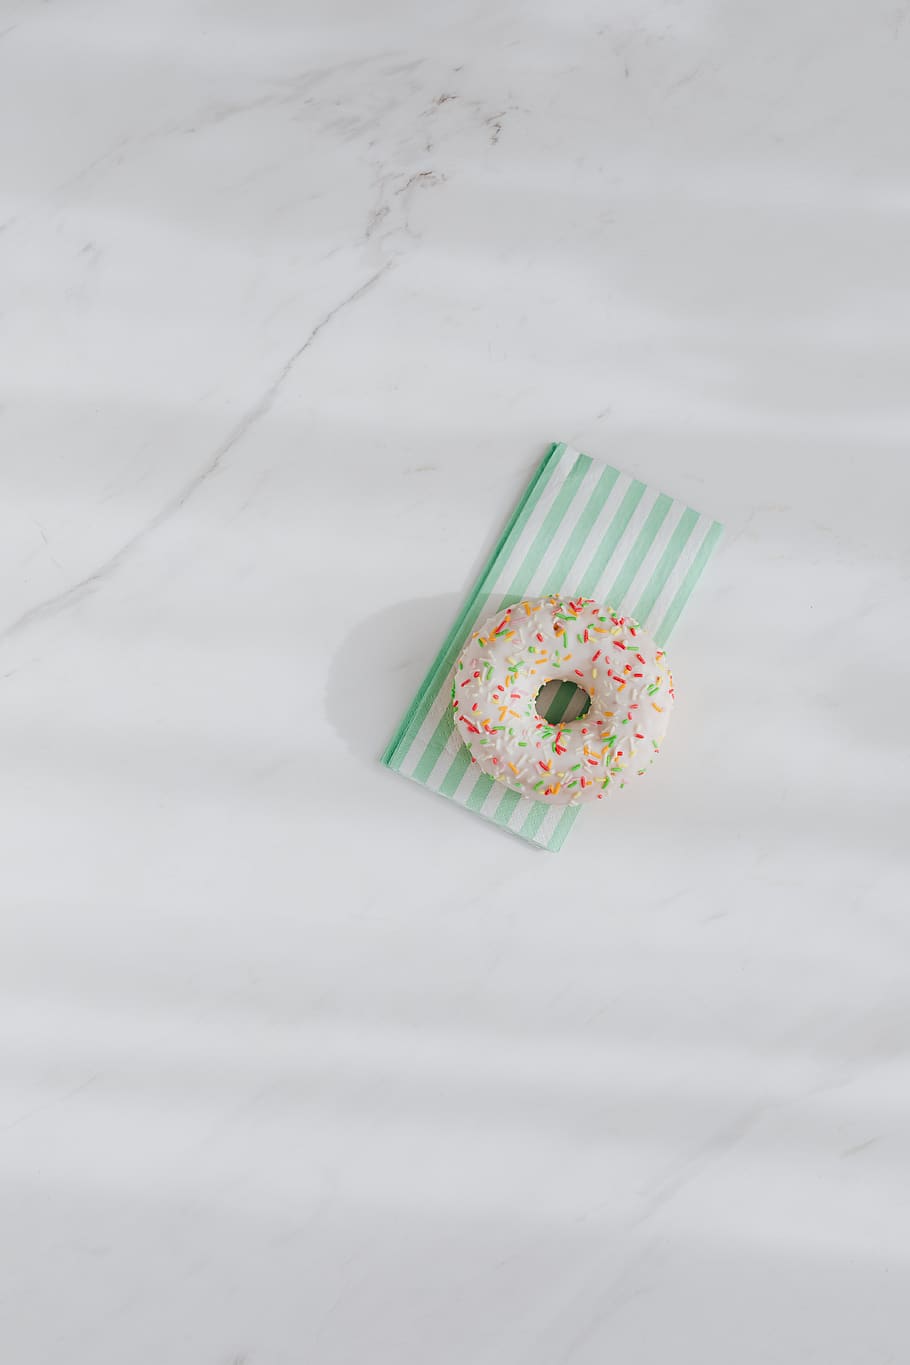 donut, doughnuts, copy, copy space, flat, flatlay, background, Donuts, paper, napkins